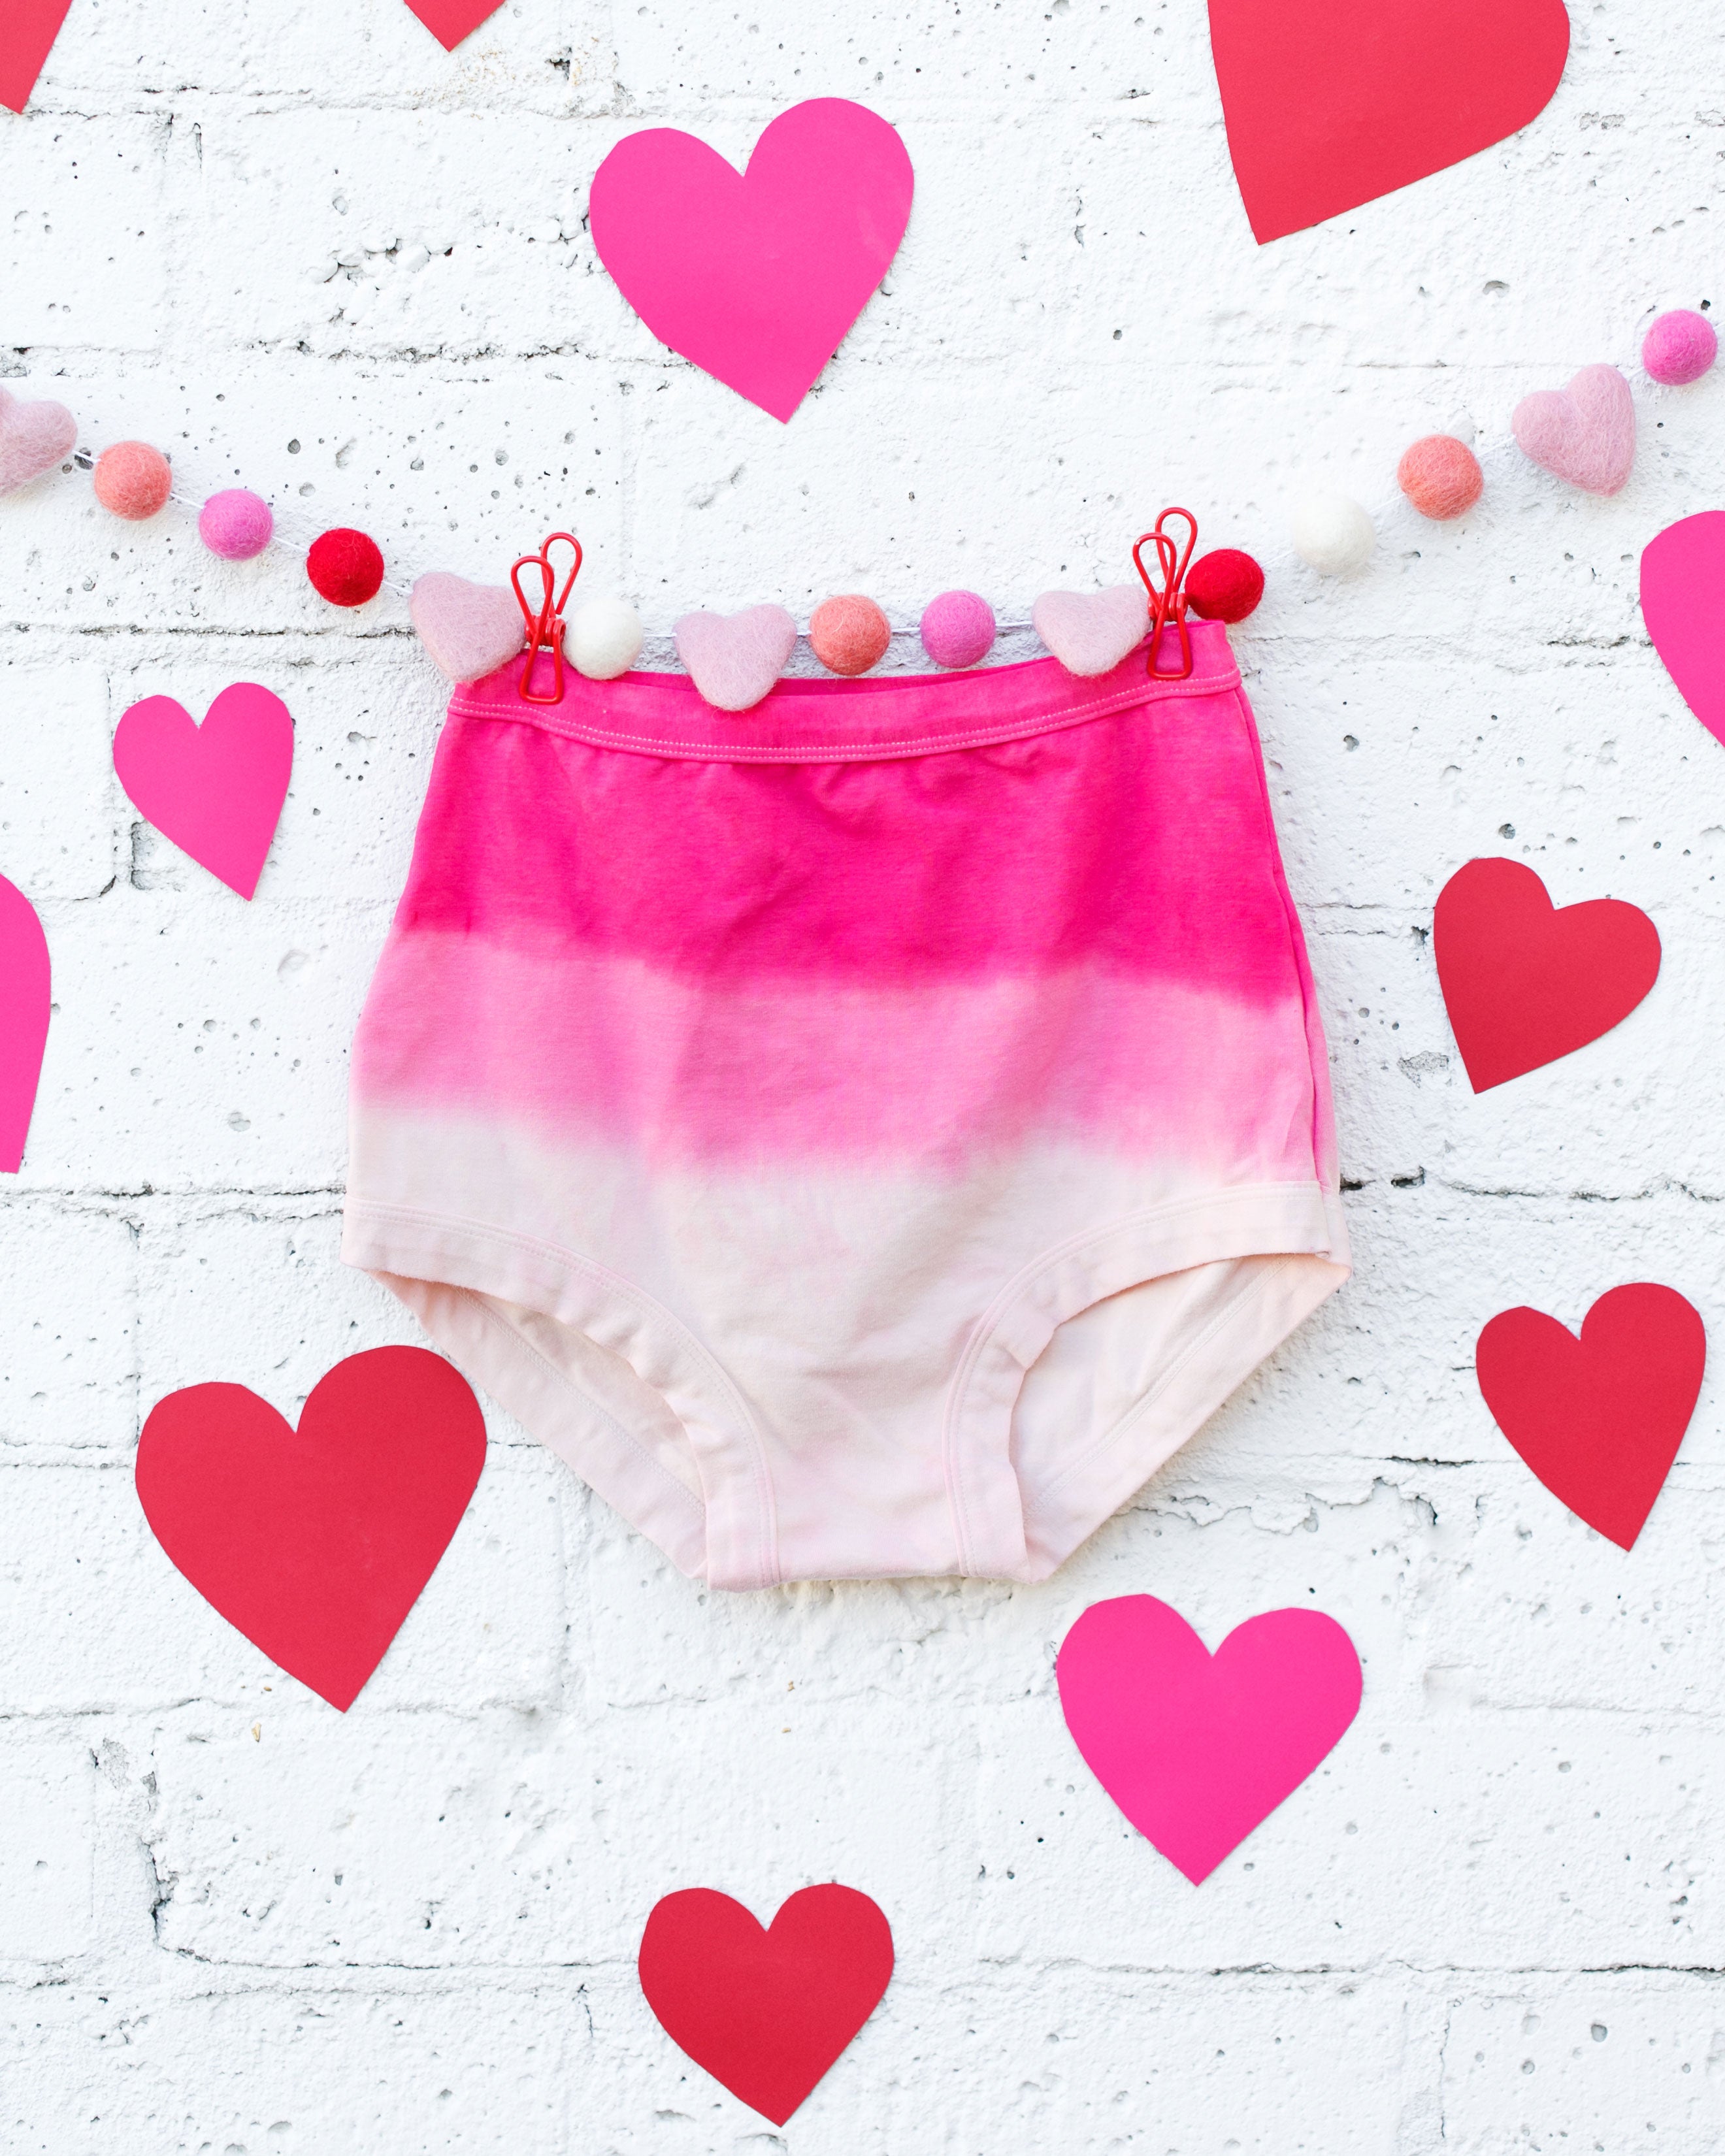 Photo of Thunderpants organic cotton Sky Rise underwear in Valentine's Day Dip Dye ombre pinks with hearts around.